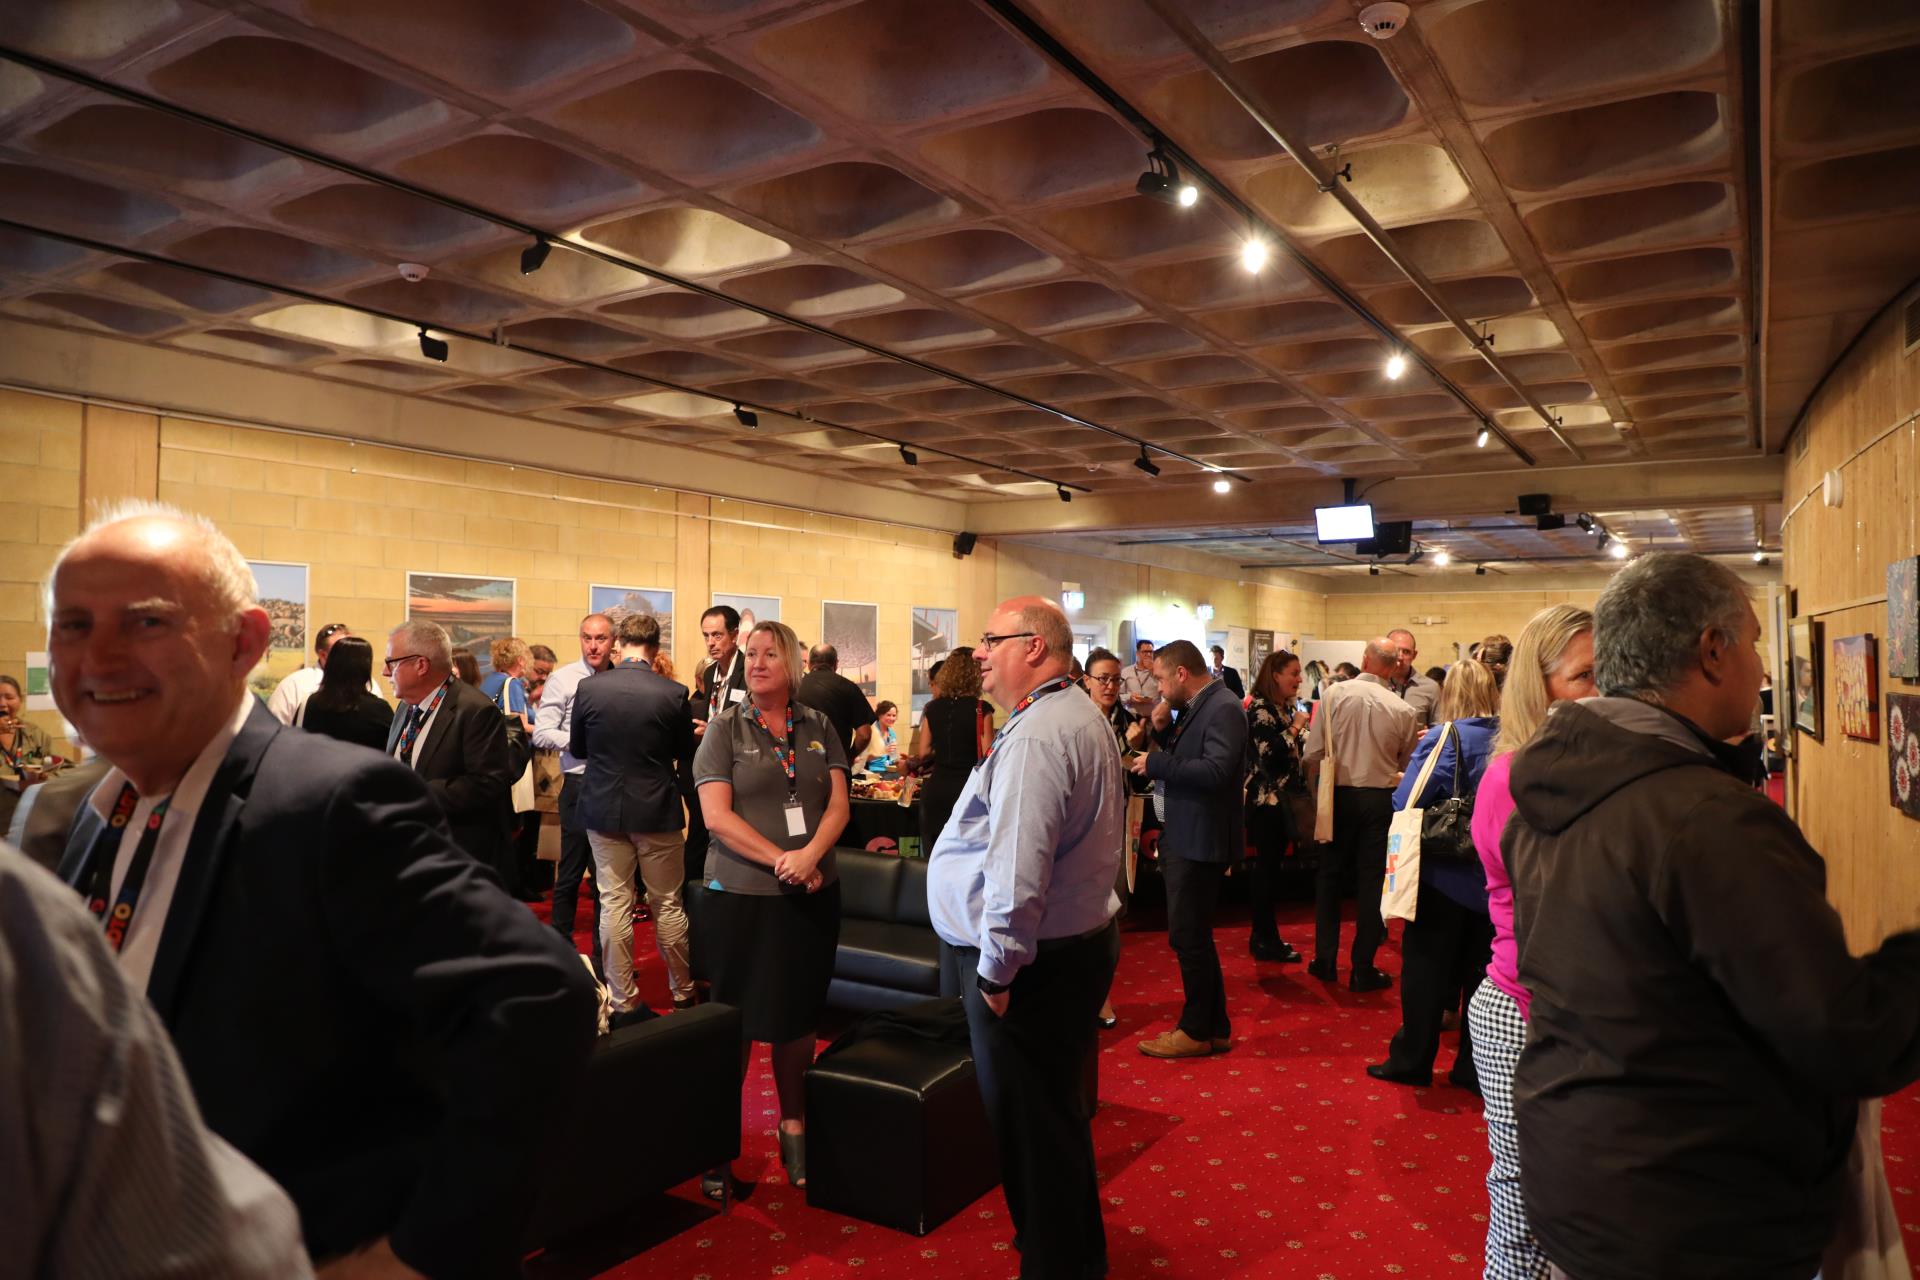 Over 230 delegates attended the Summit and enjoyed opportunities to network with government and industry representatives.